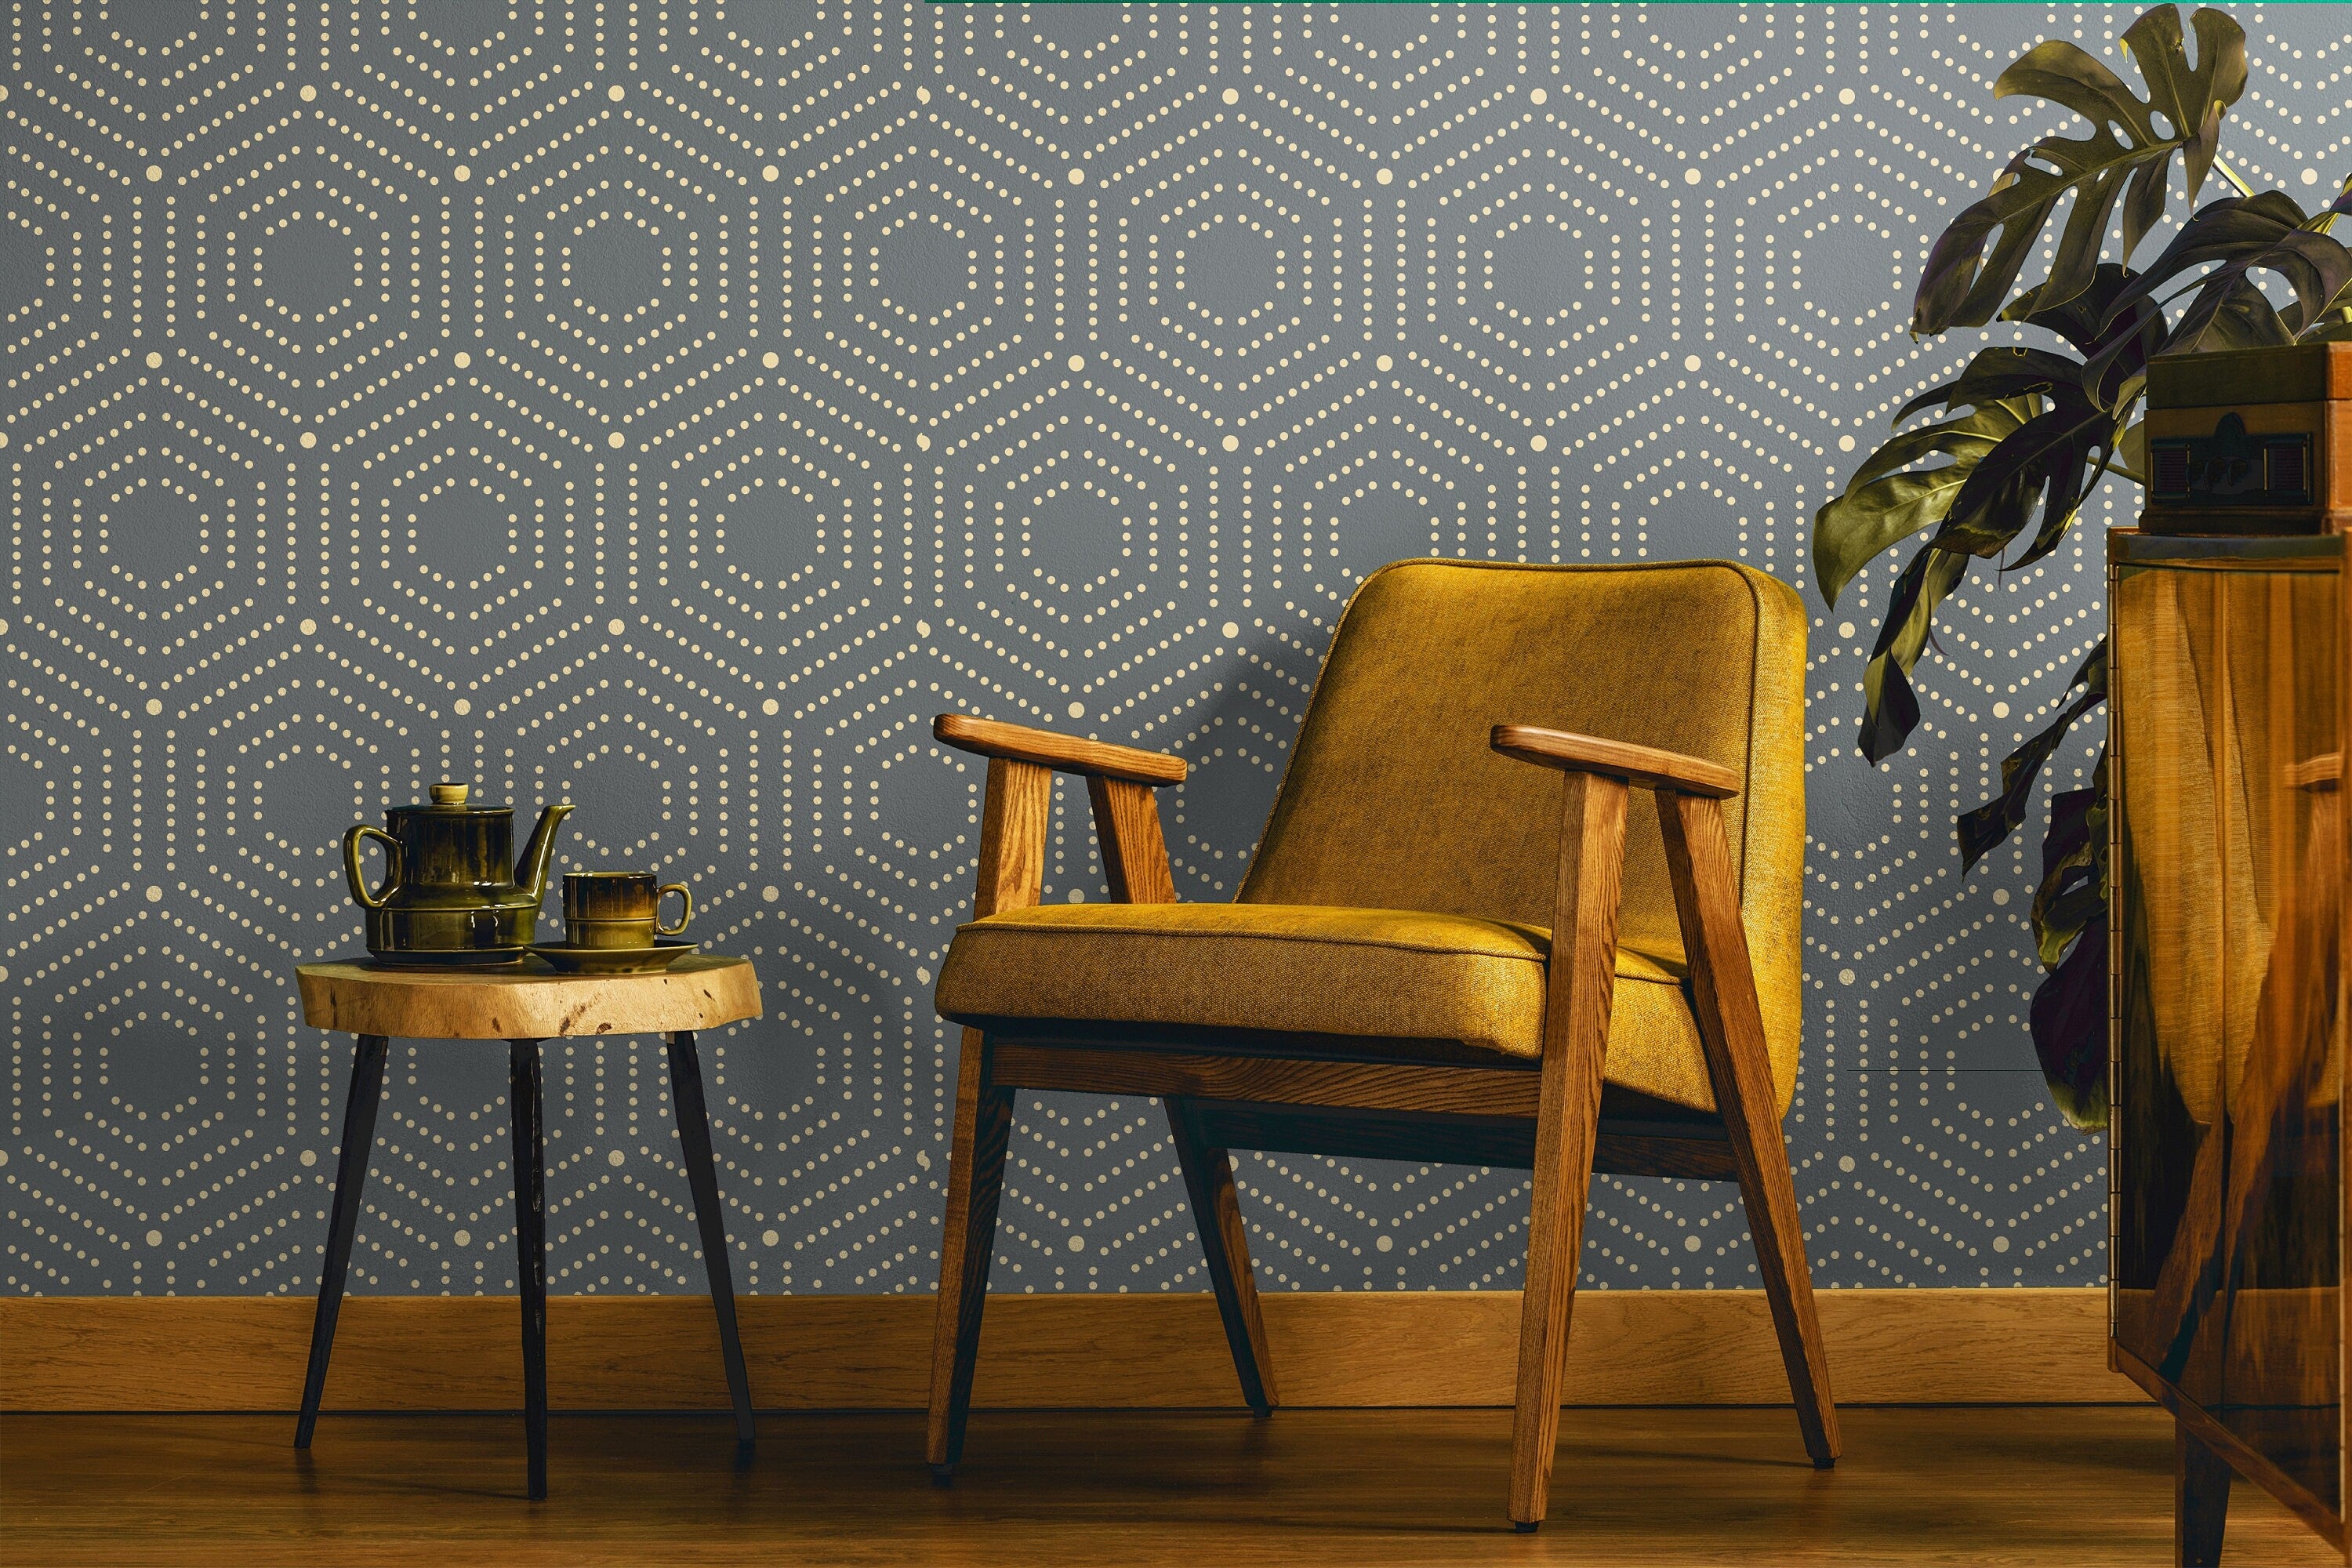 Removable Wallpaper Gray And Gold Modern Wallpaper | Peel And Stick Wallpaper | Adhesive Wallpaper | Wall Paper Peel Stick Wall Mural 3523 - JamesAndColors